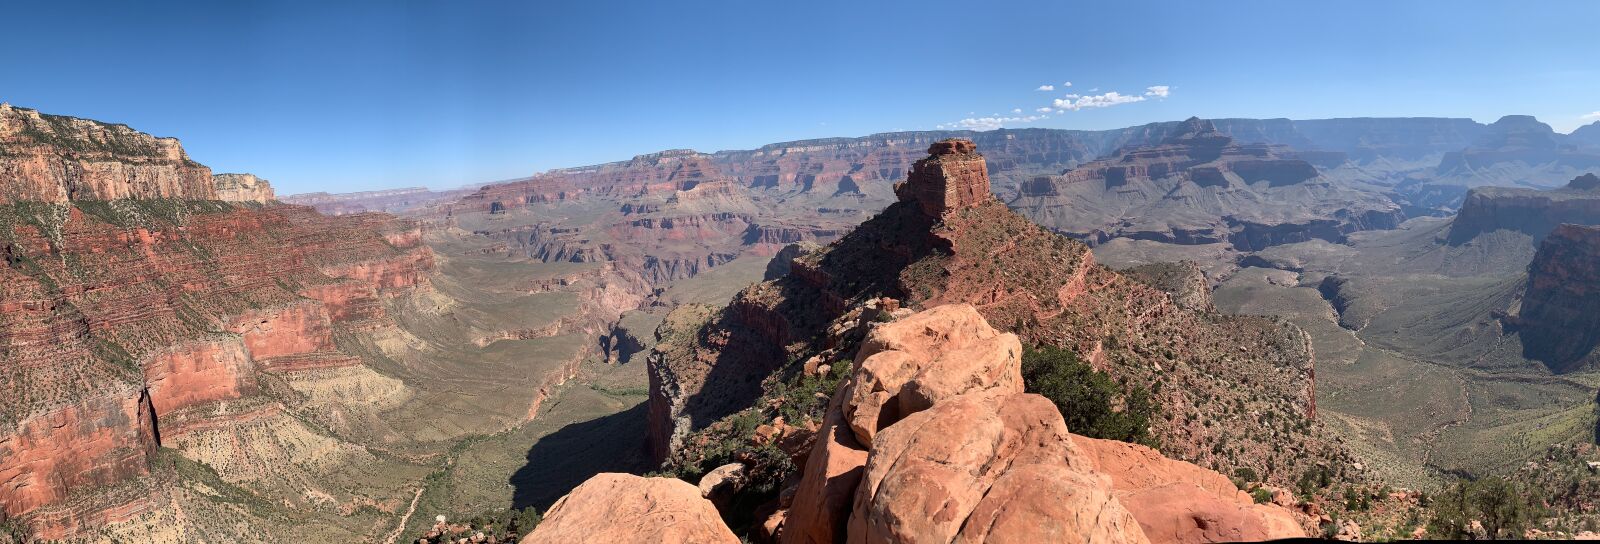 Apple iPhone XS Max sample photo. Grand canyon, panorama, landscape photography